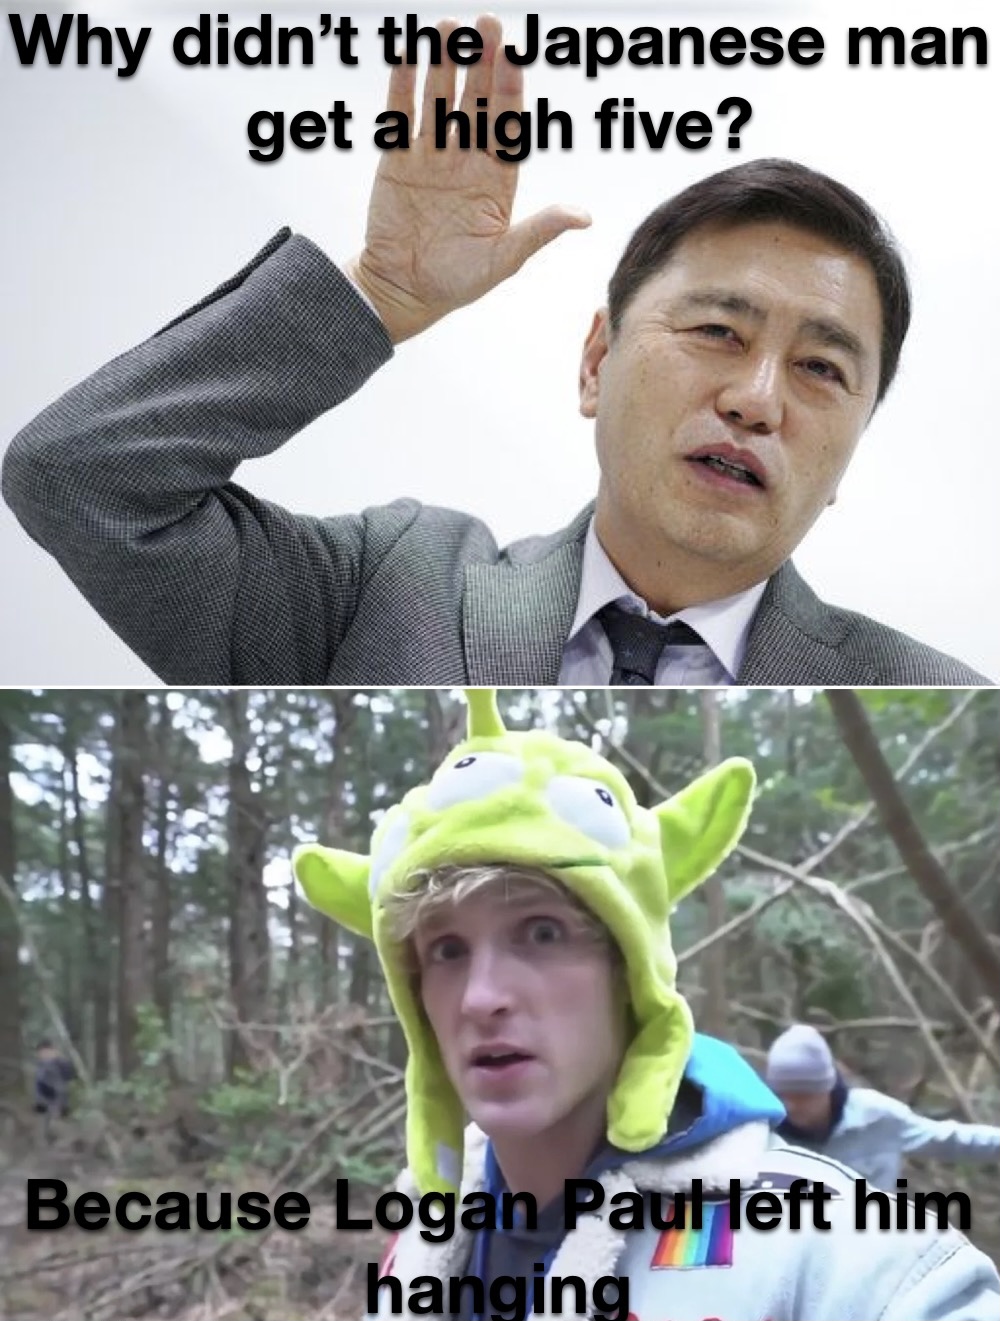 Why didn’t the Japanese man get a high-five? Because Logan Paul left him hanging.